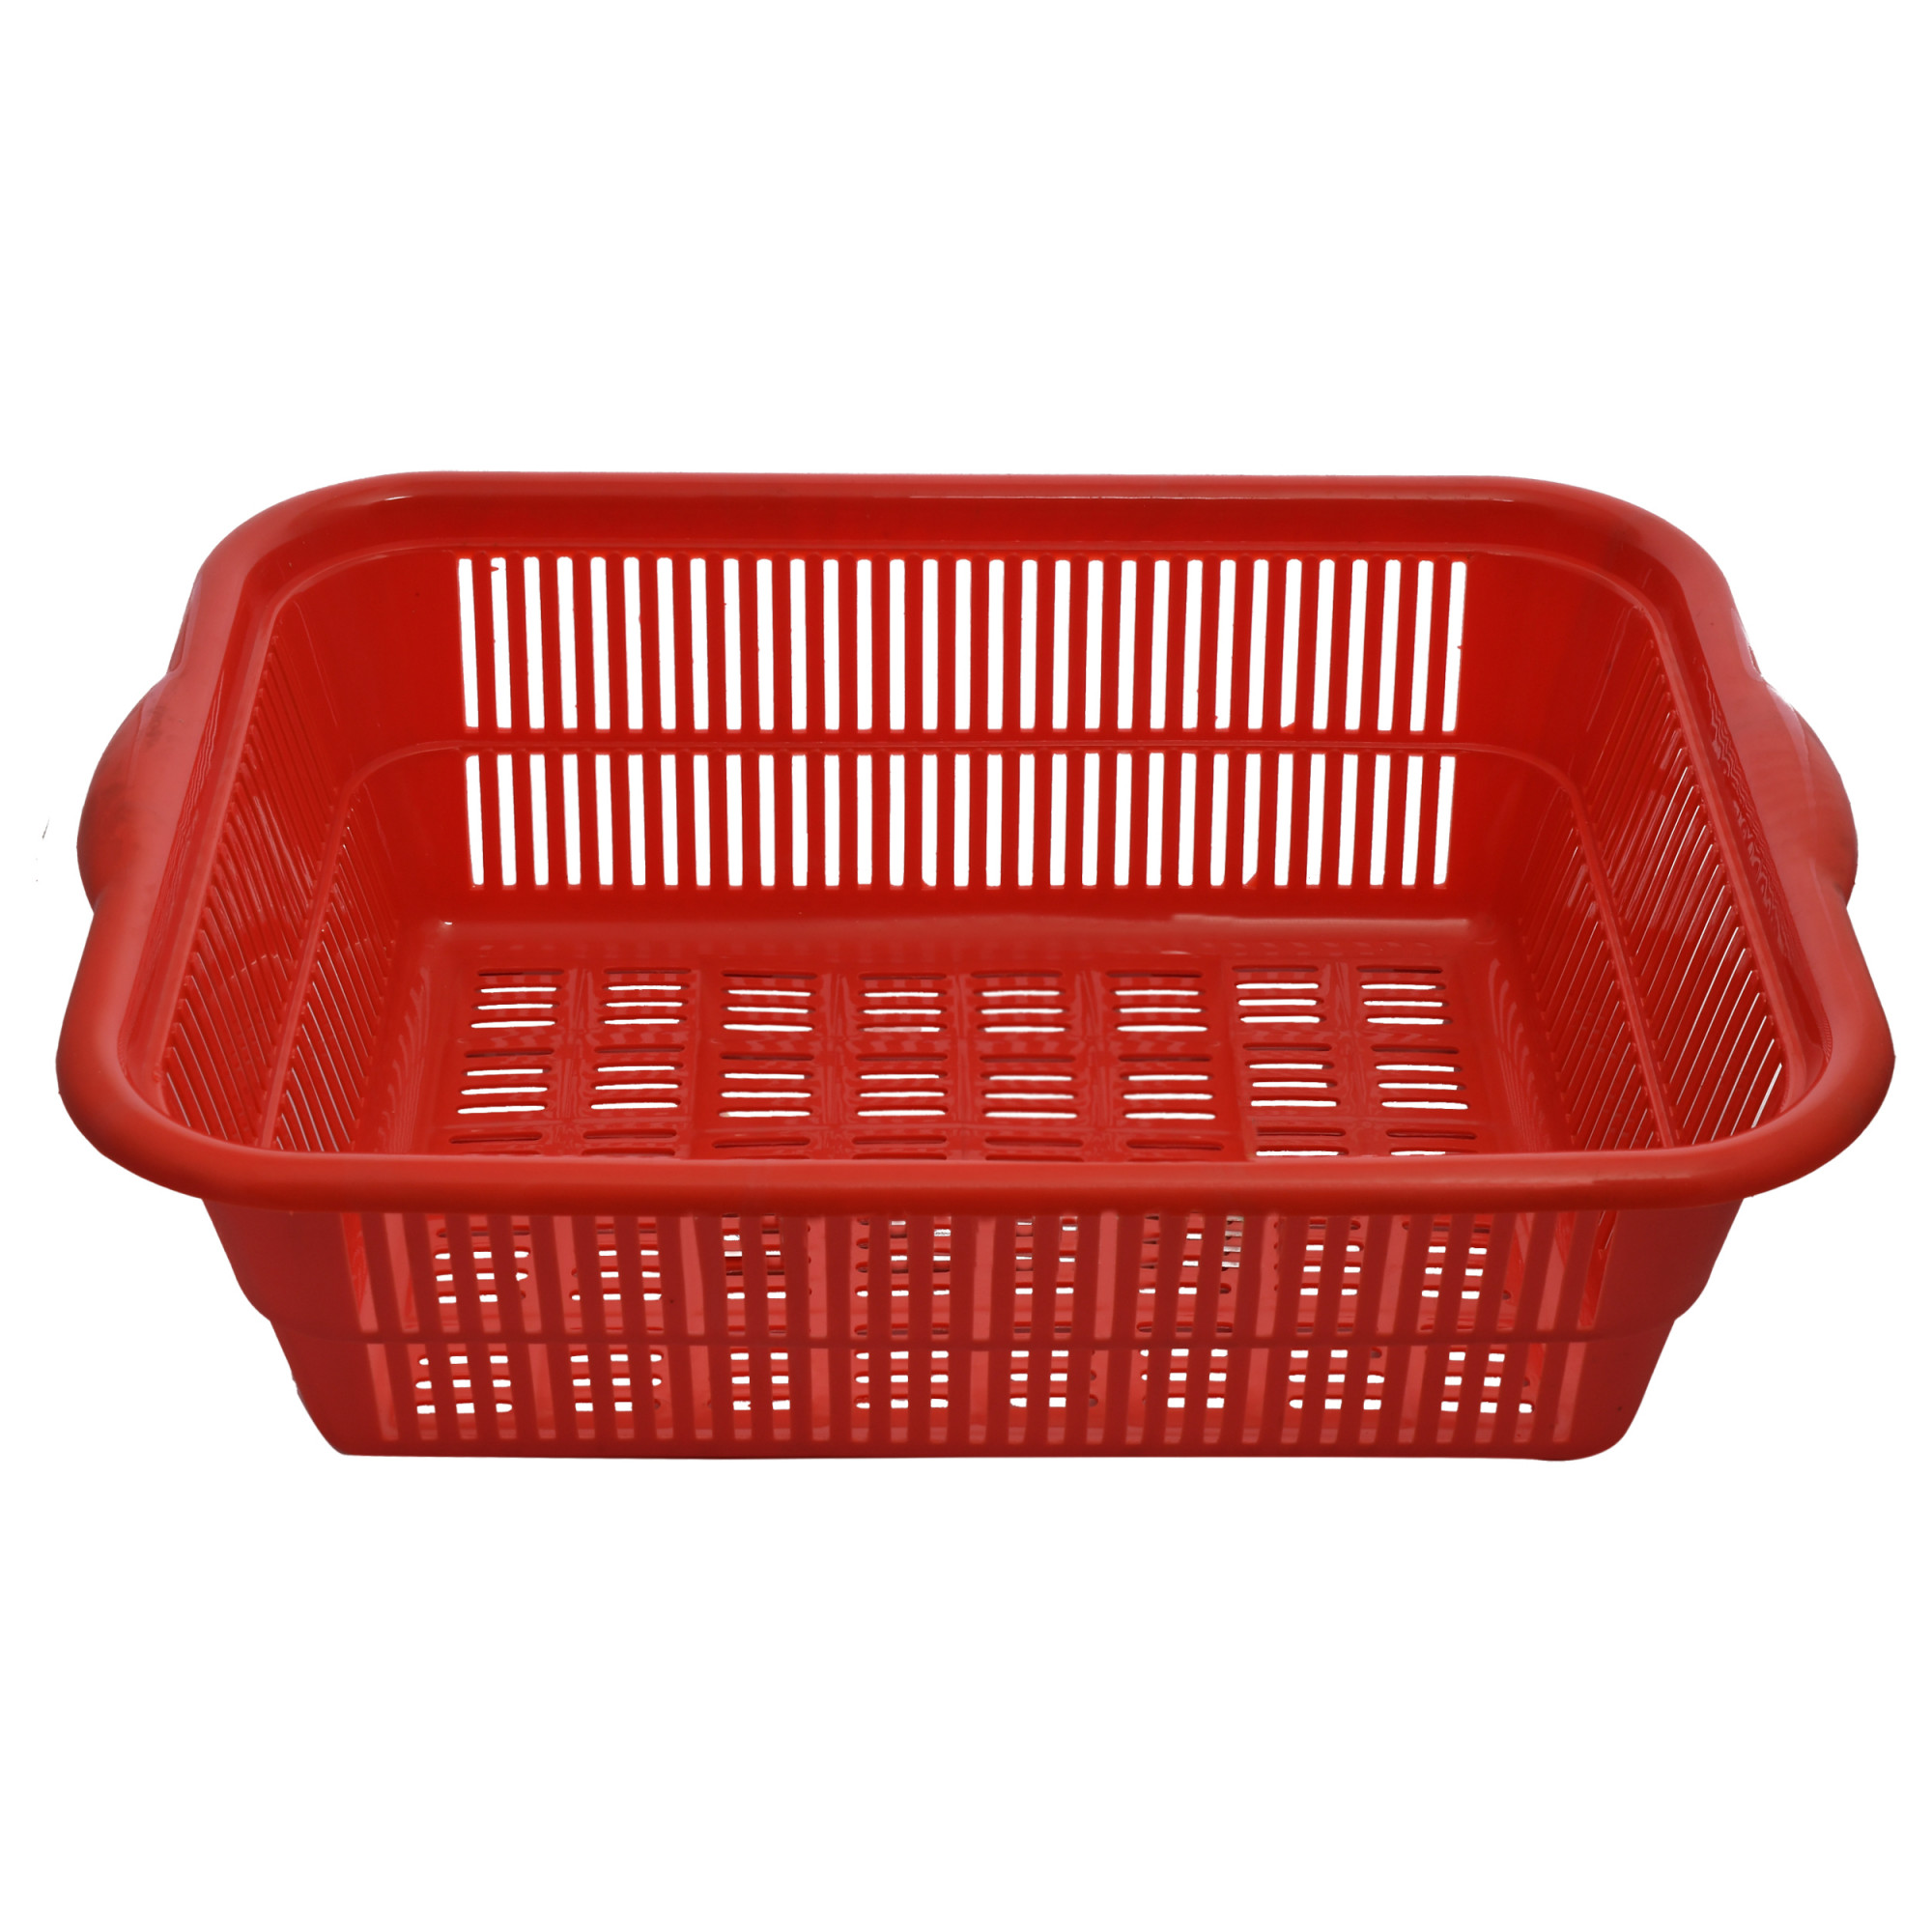 Kuber Industries 2 Pieces Plastic Kitchen Dish Rack Drainer Vegetables And Fruits Basket Dish Rack Multipurpose Organizers ,Large Size,Green & Red